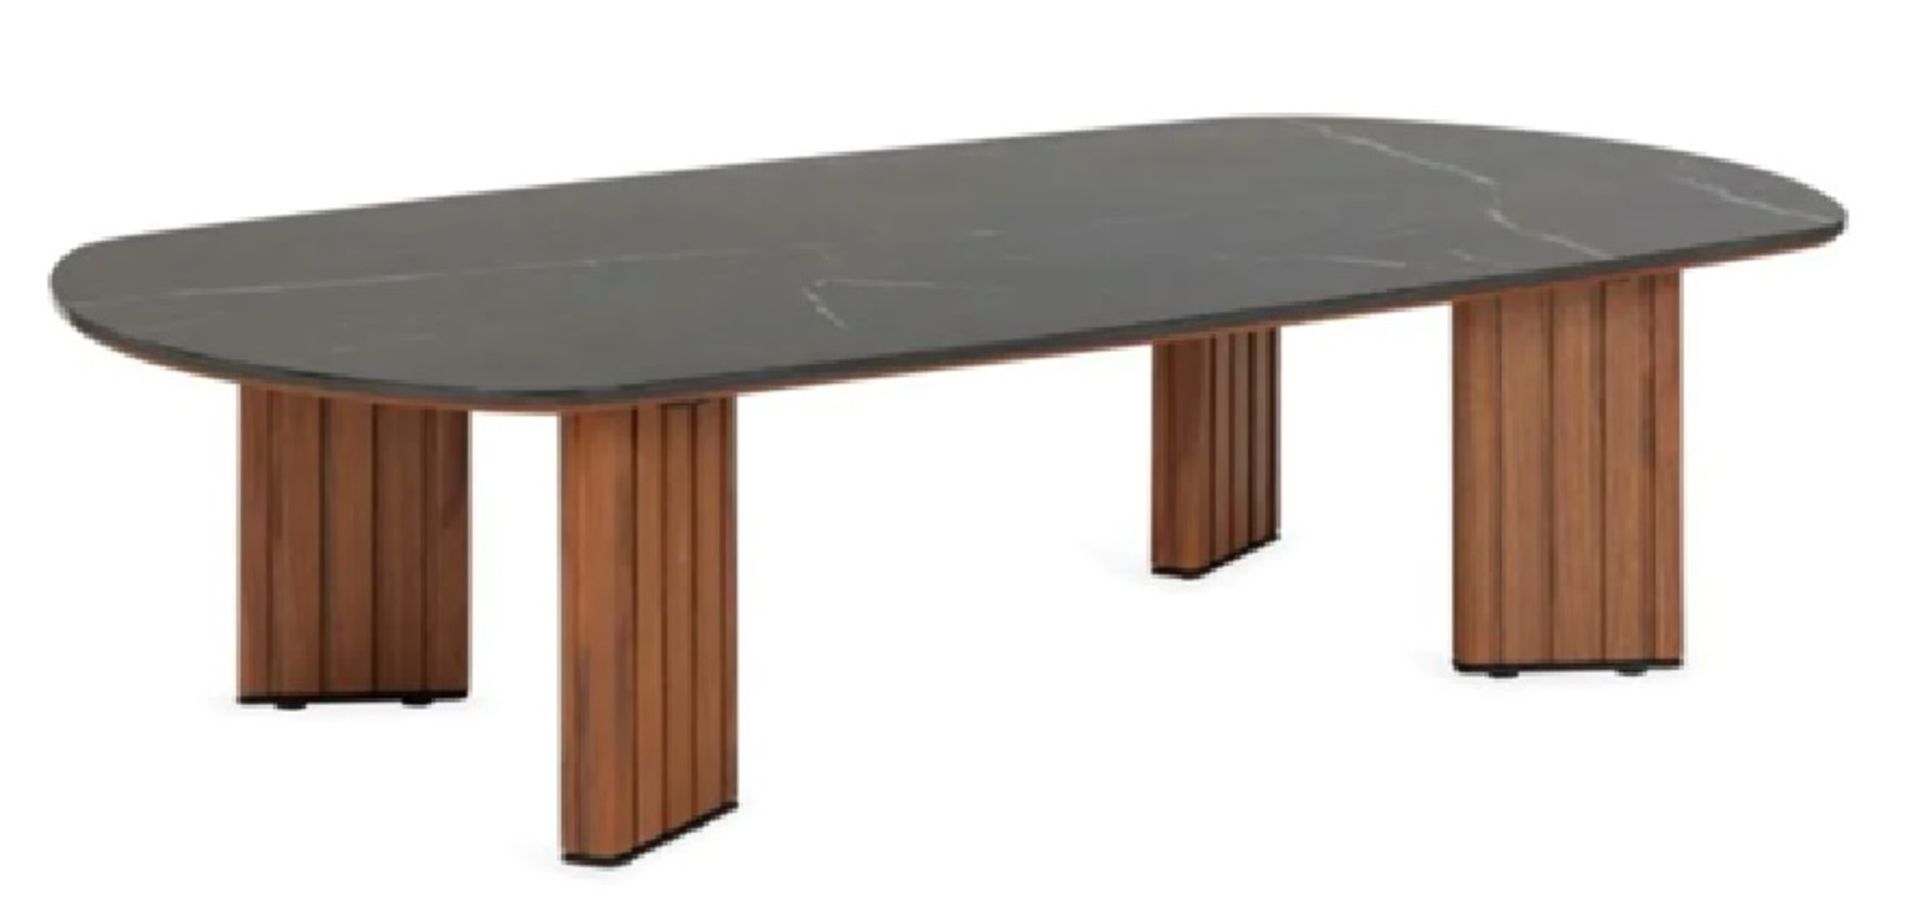 Carl Cocktail Table Designed in the mid century modern style, the Carl-Black American Walnut and